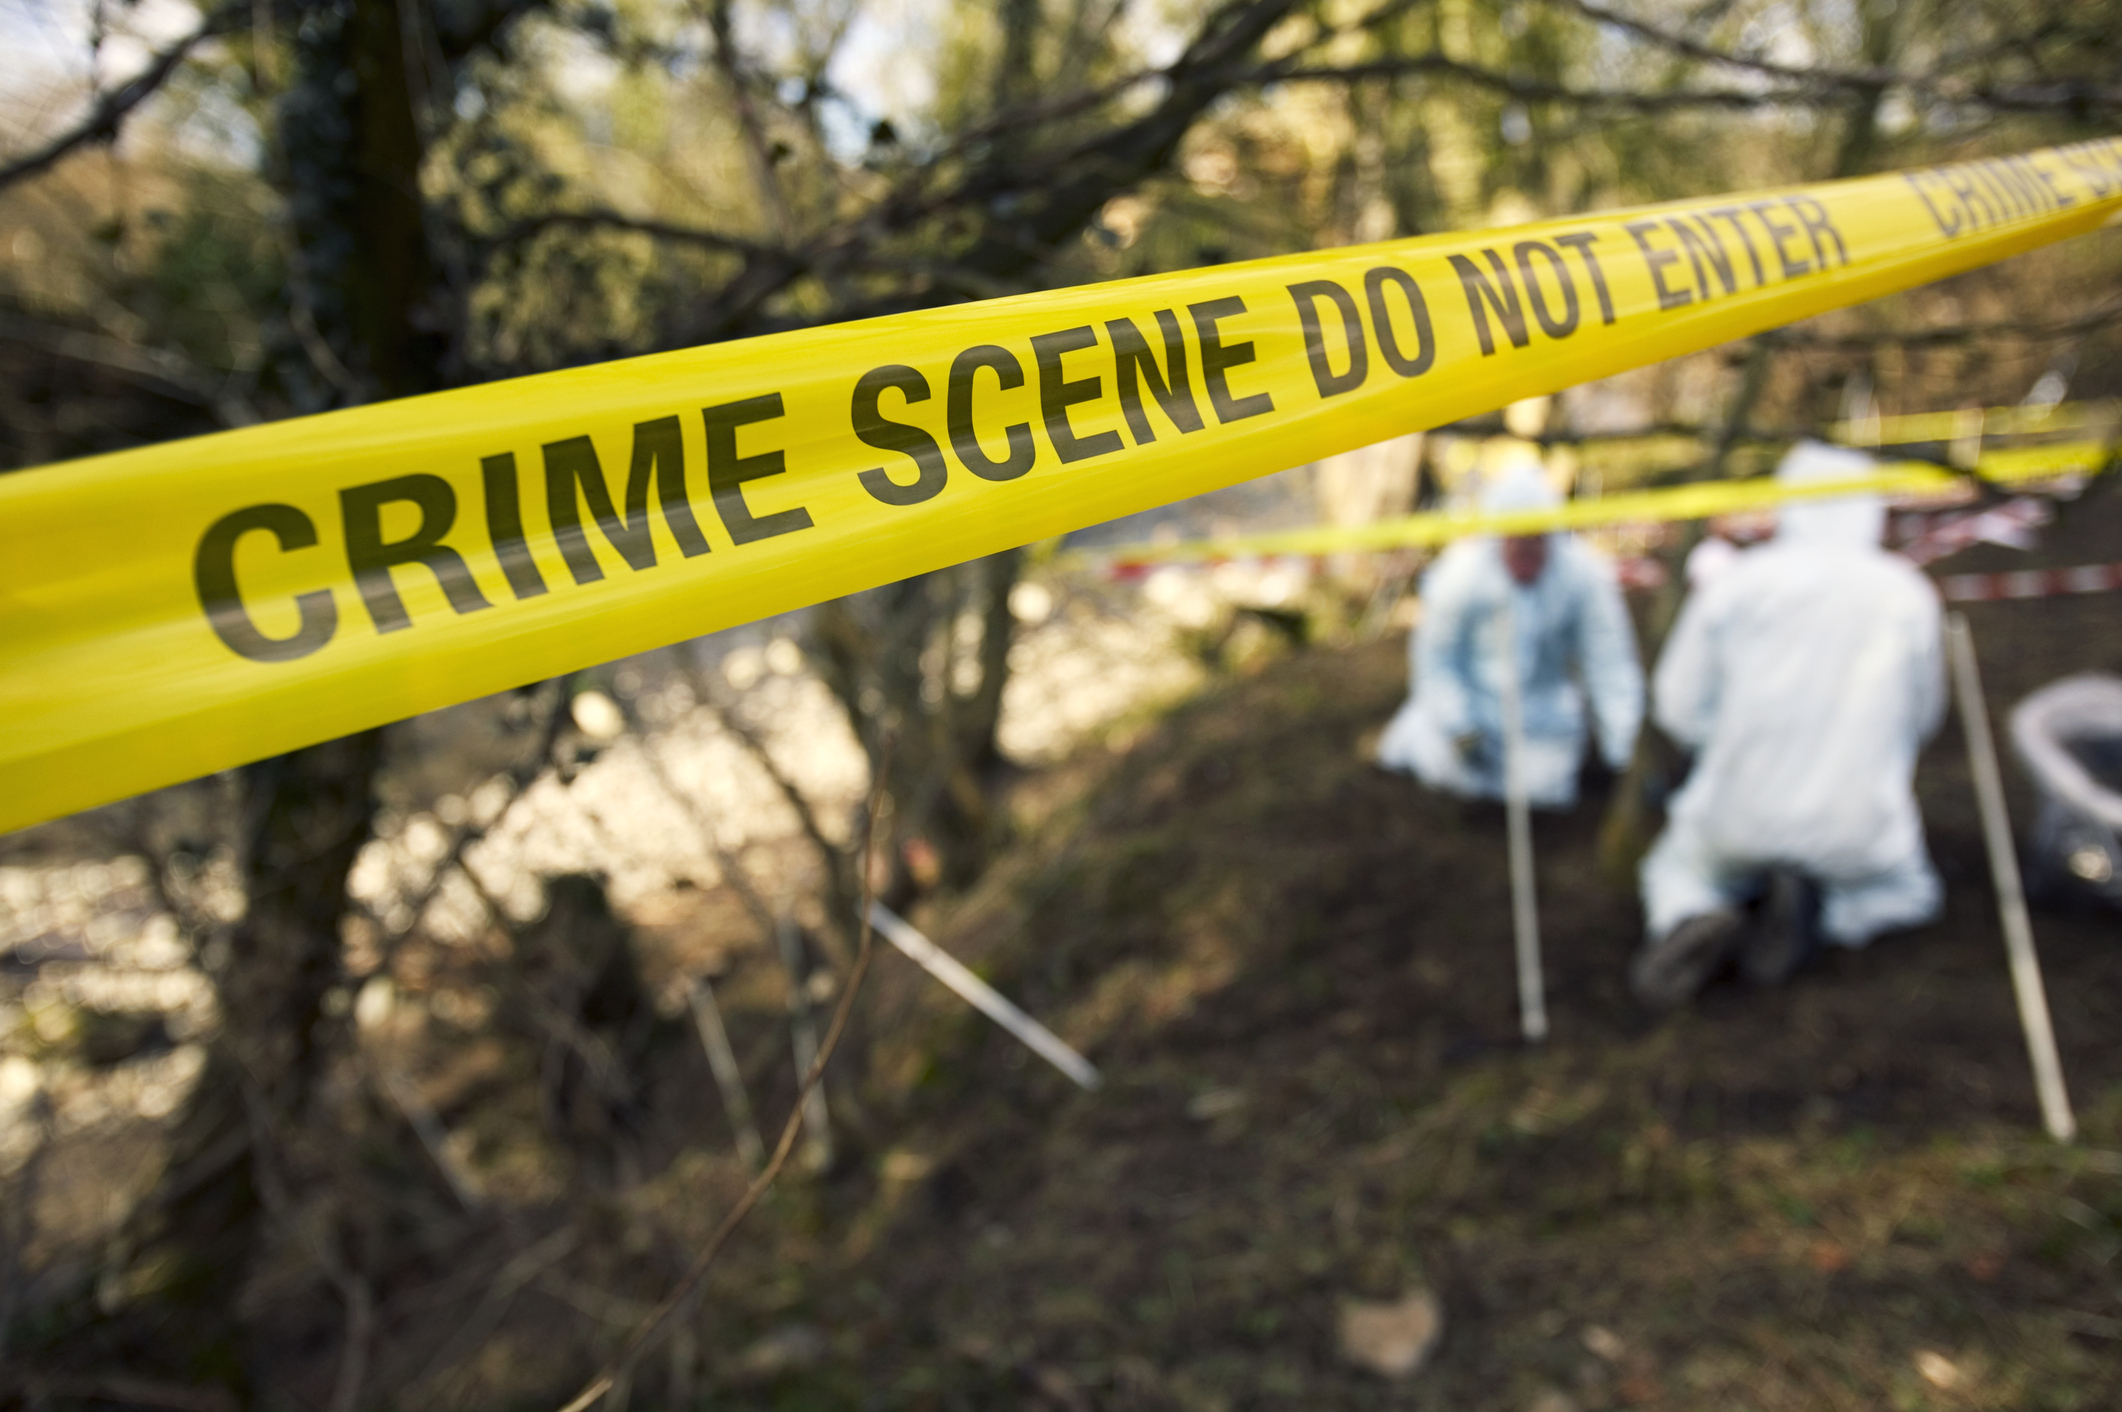 Potential Iowa Serial Killer Still Shrouded In Mystery After Police Excavation Turns Up Empty